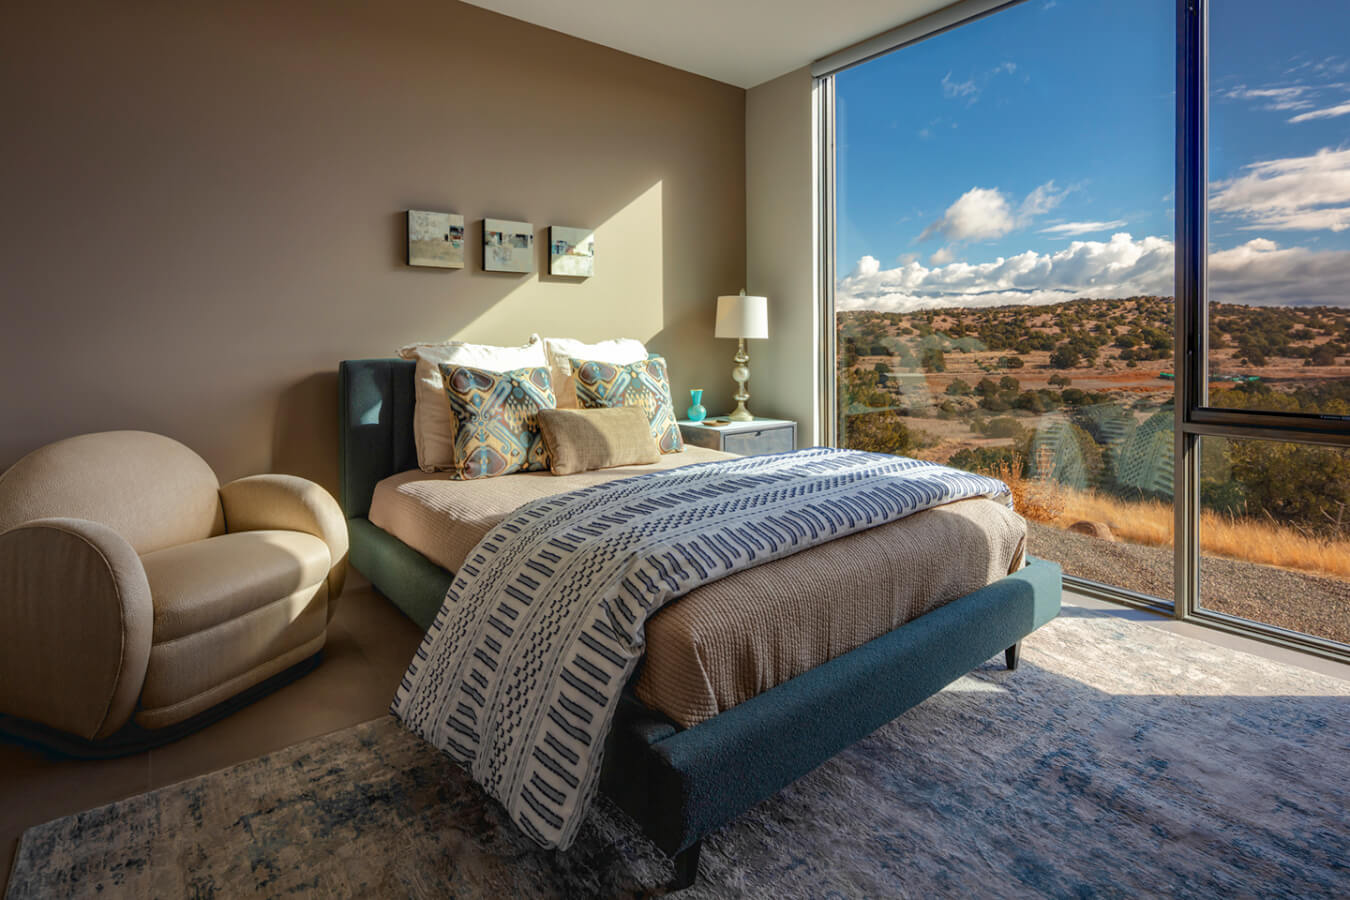 A beautifully designed bedroom with a stunning view of the mountains, created by an architect.